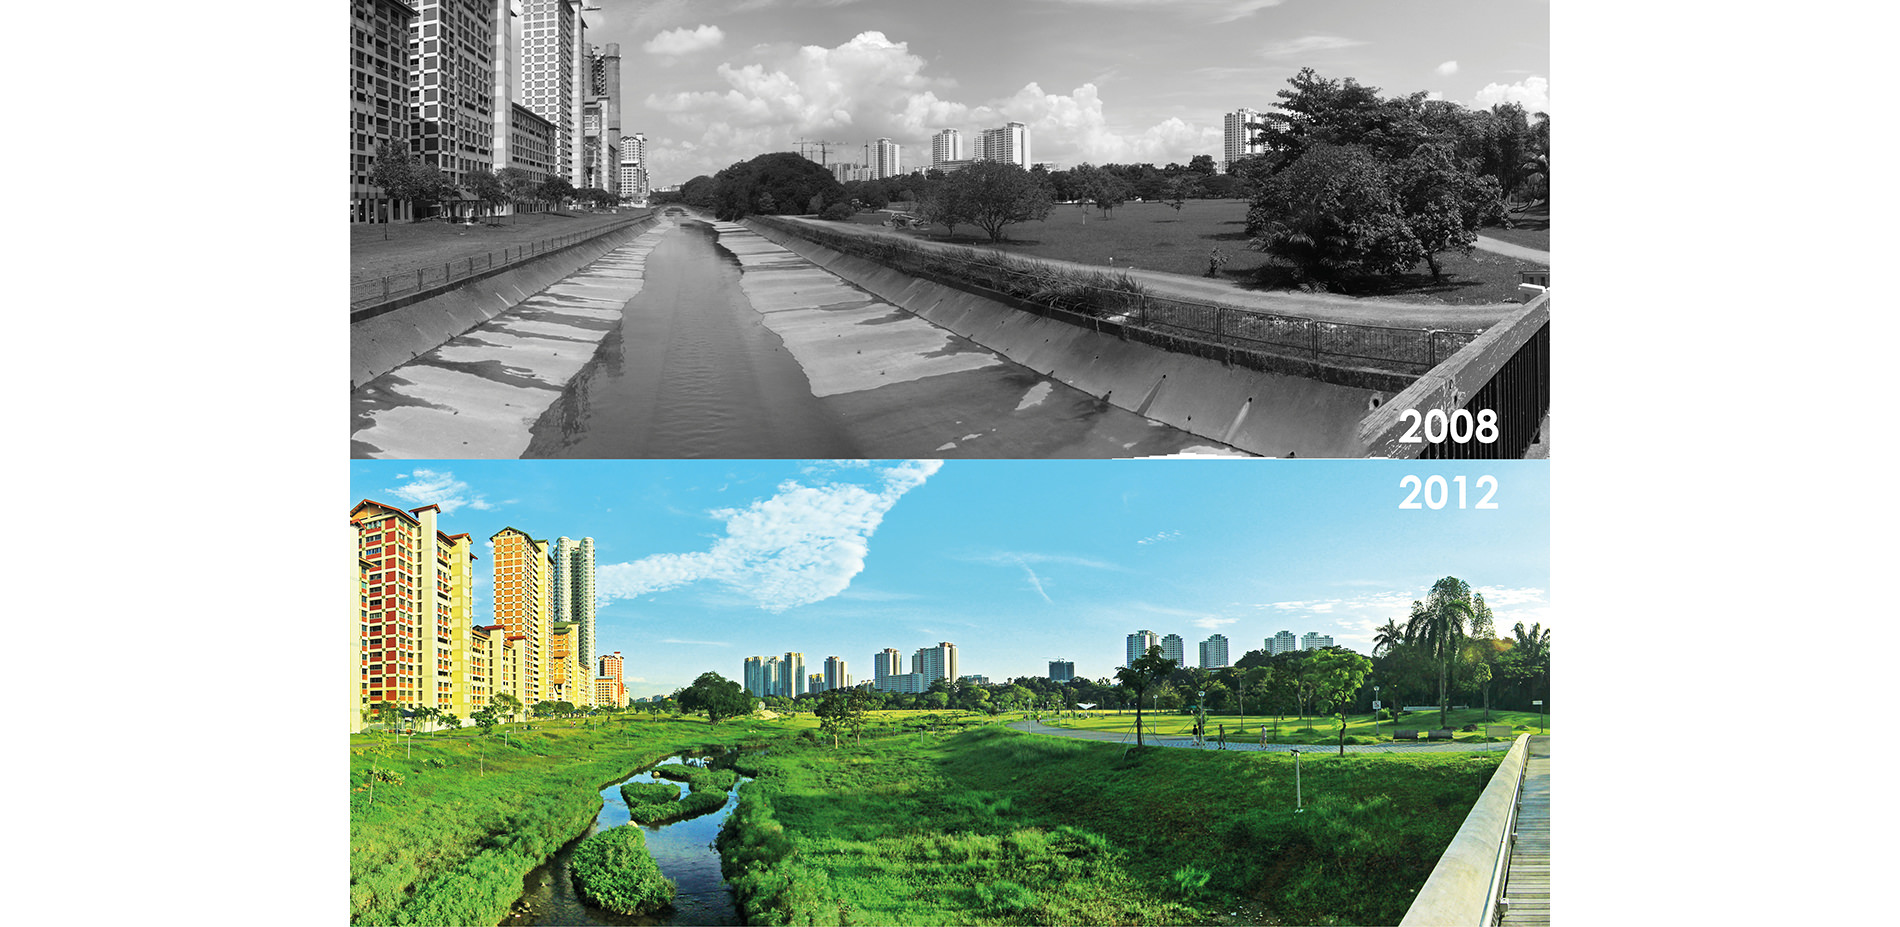 River Before and After Development